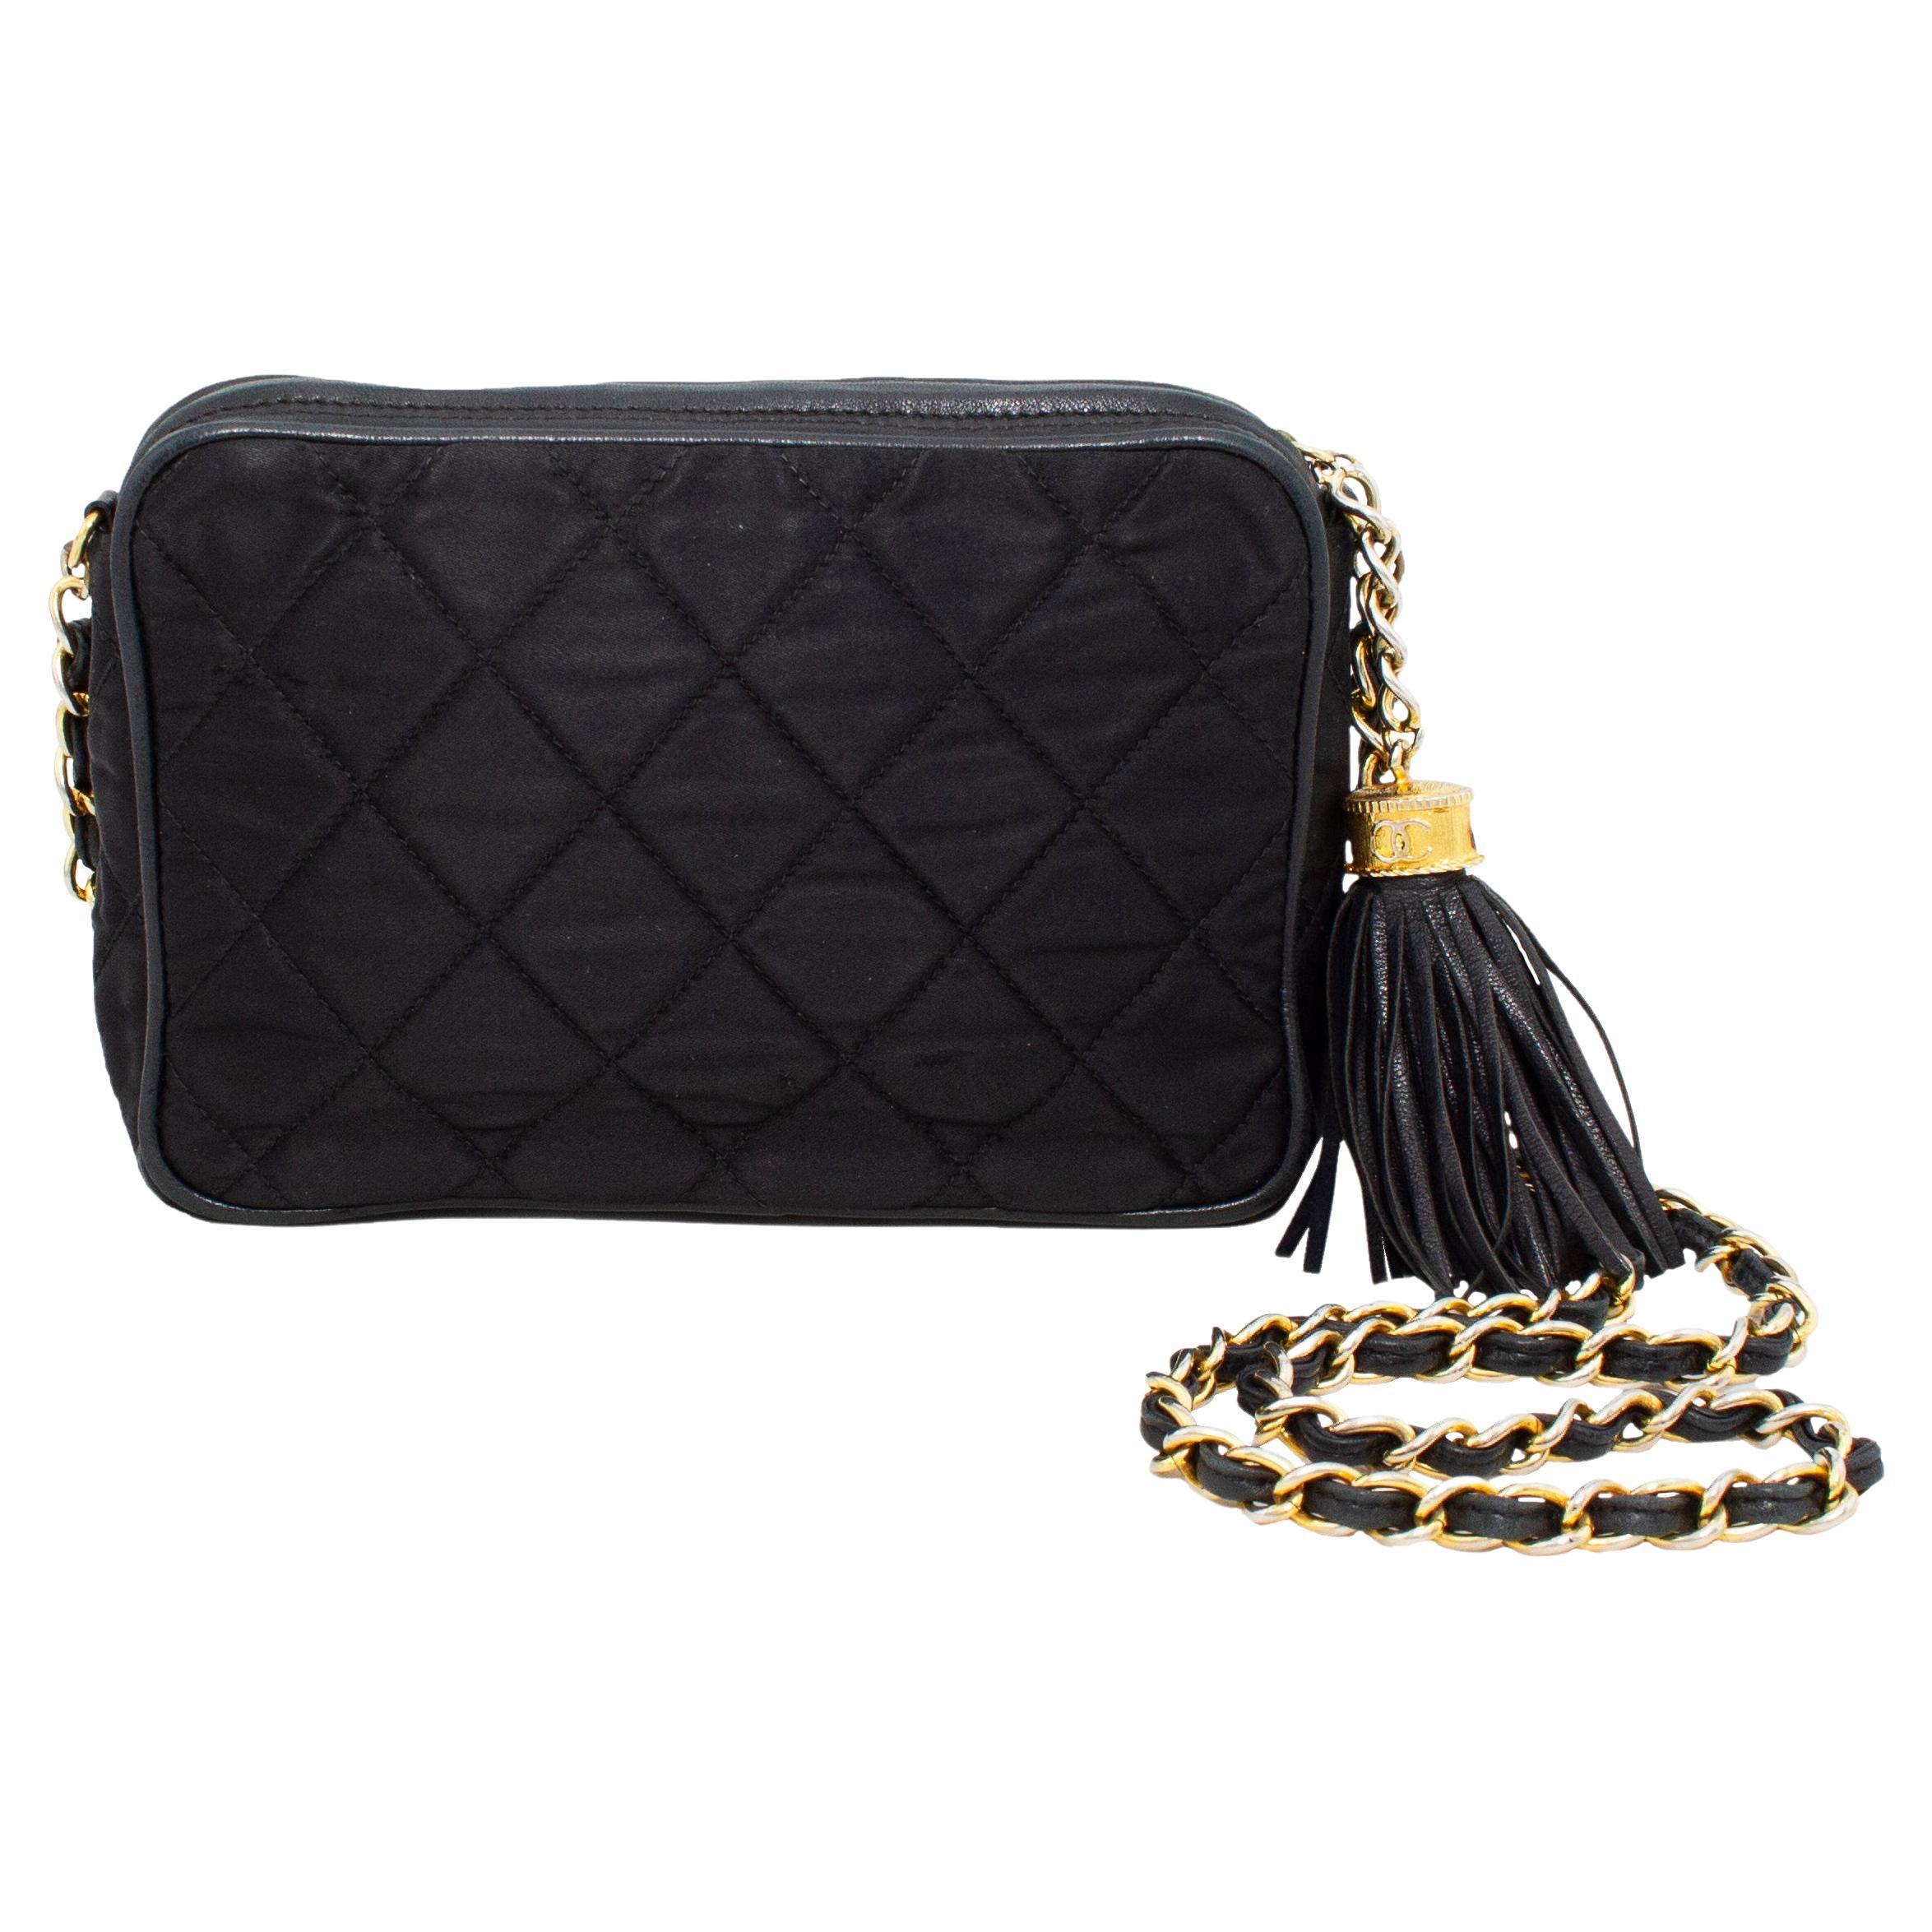 1980s Chanel Black Satin Quilted Evening Bag